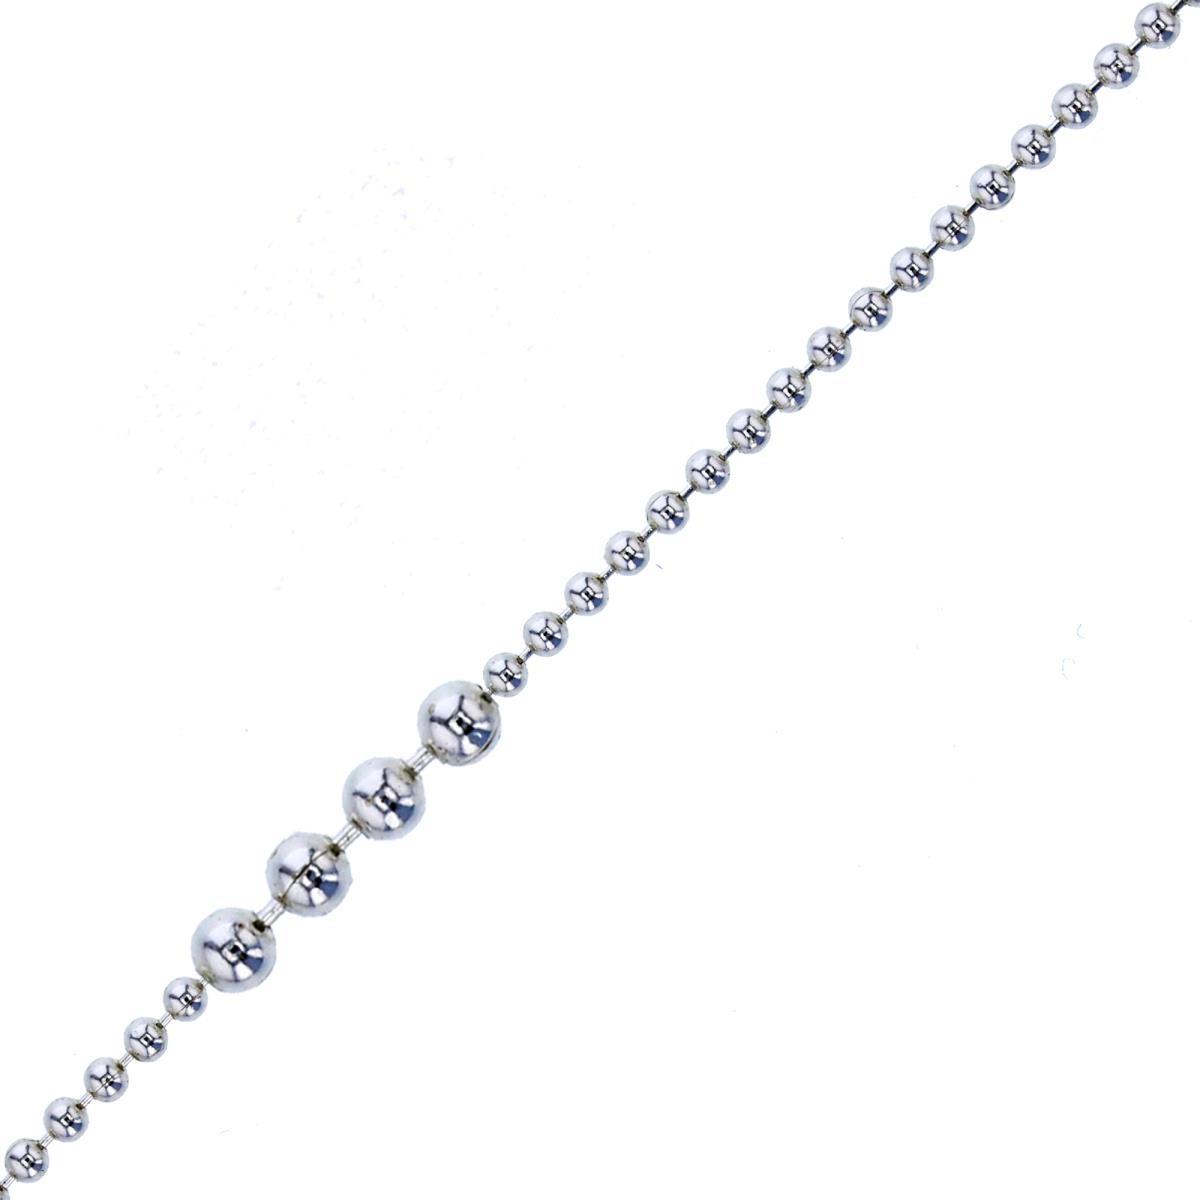 Sterling Silver Anti-Tarnish 1.50mm Bead 16" Basic Chain Necklace